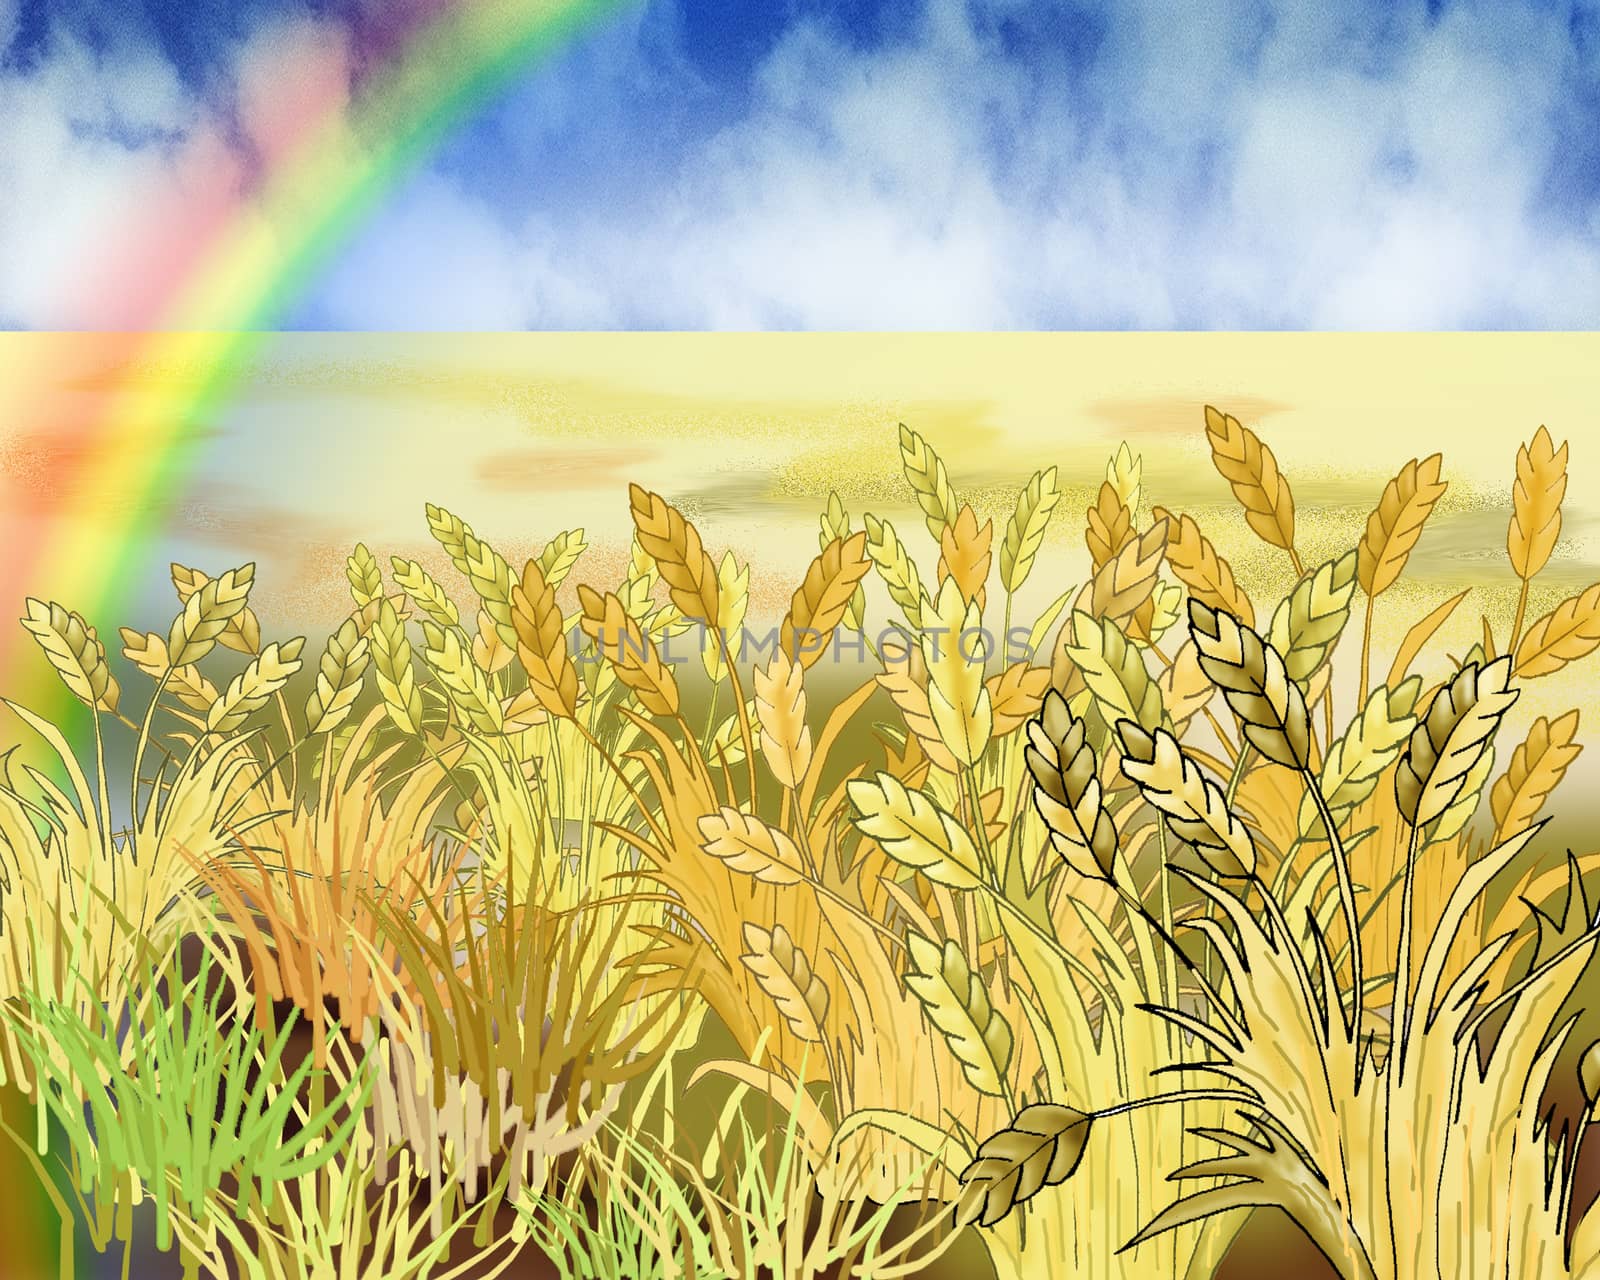 Rainbow Over Wheat Field in Summer Day by Multipedia